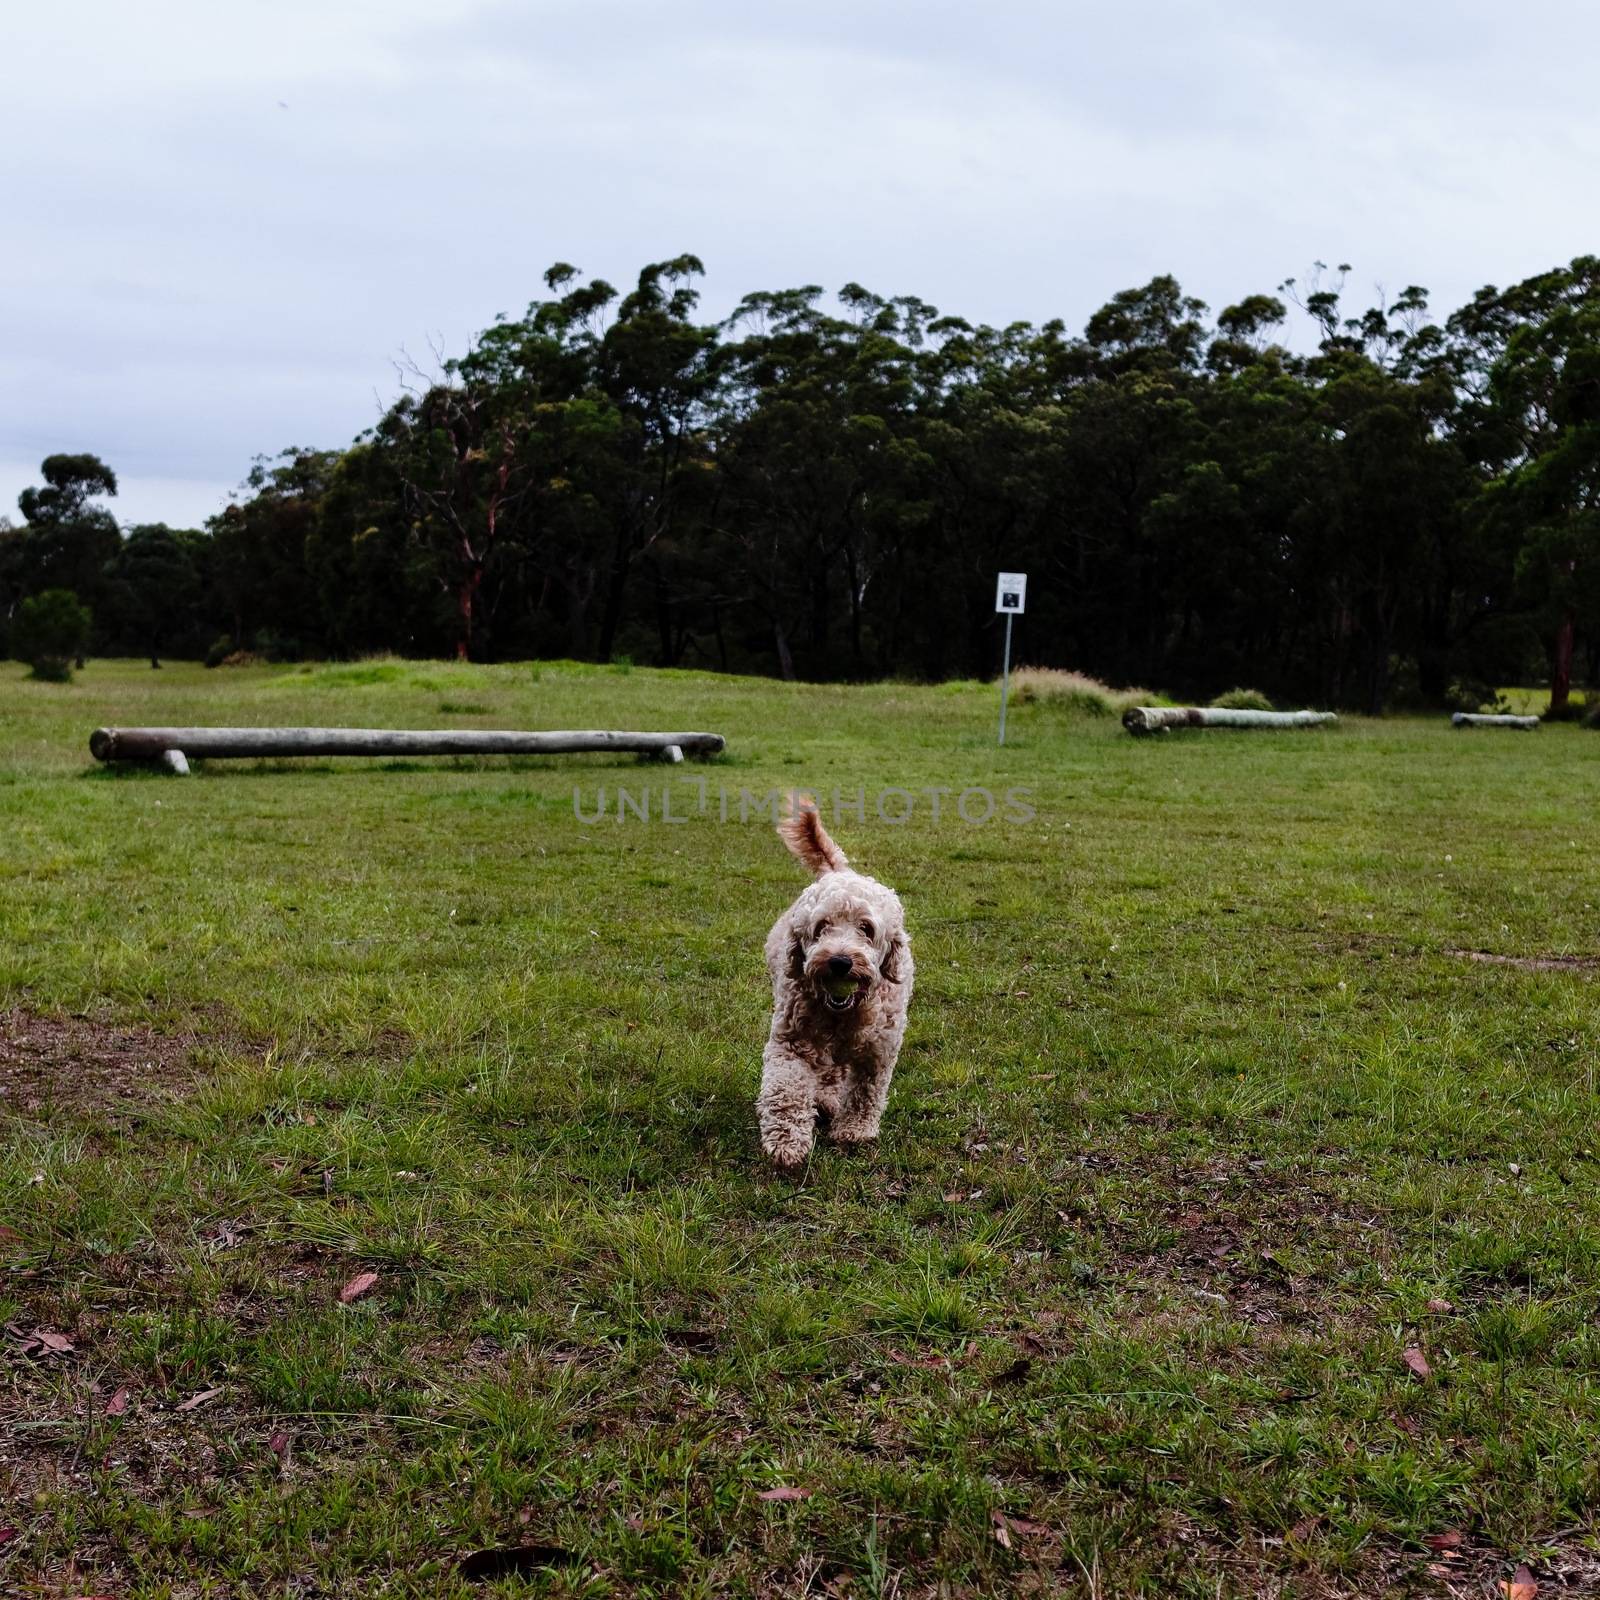 Dog bringing the ball back in his mouth in the dog park at the former Lawson golf course in the Blue Mountains of Australia.